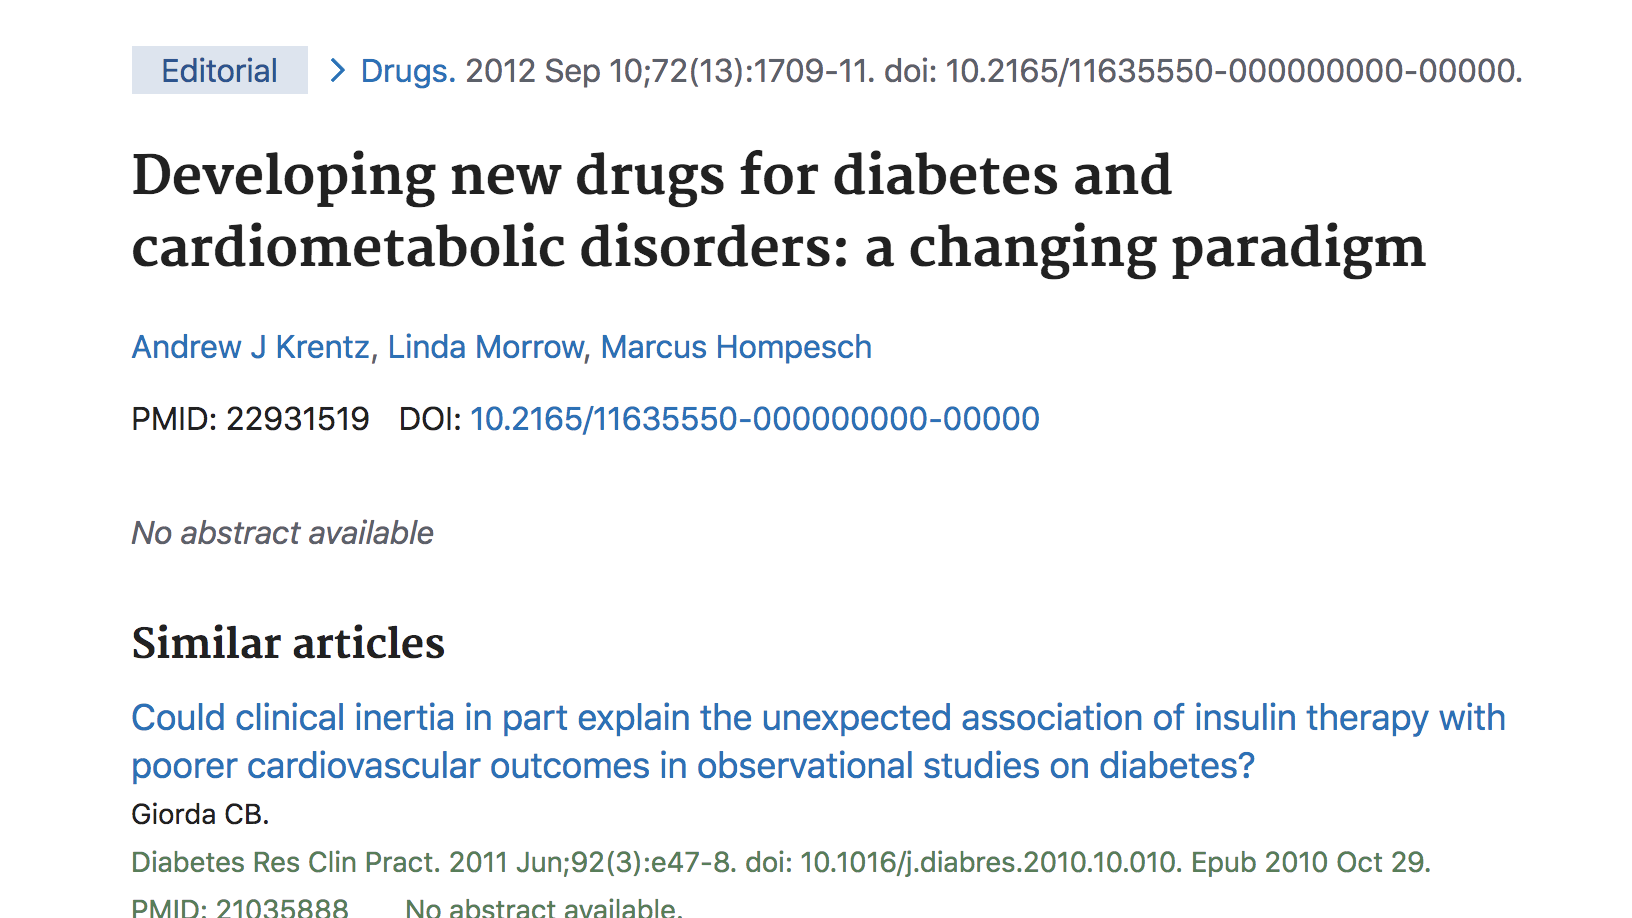 image of Developing new drugs for diabetes and cardiometabolic disorders: a changing paradigm. Drugs.